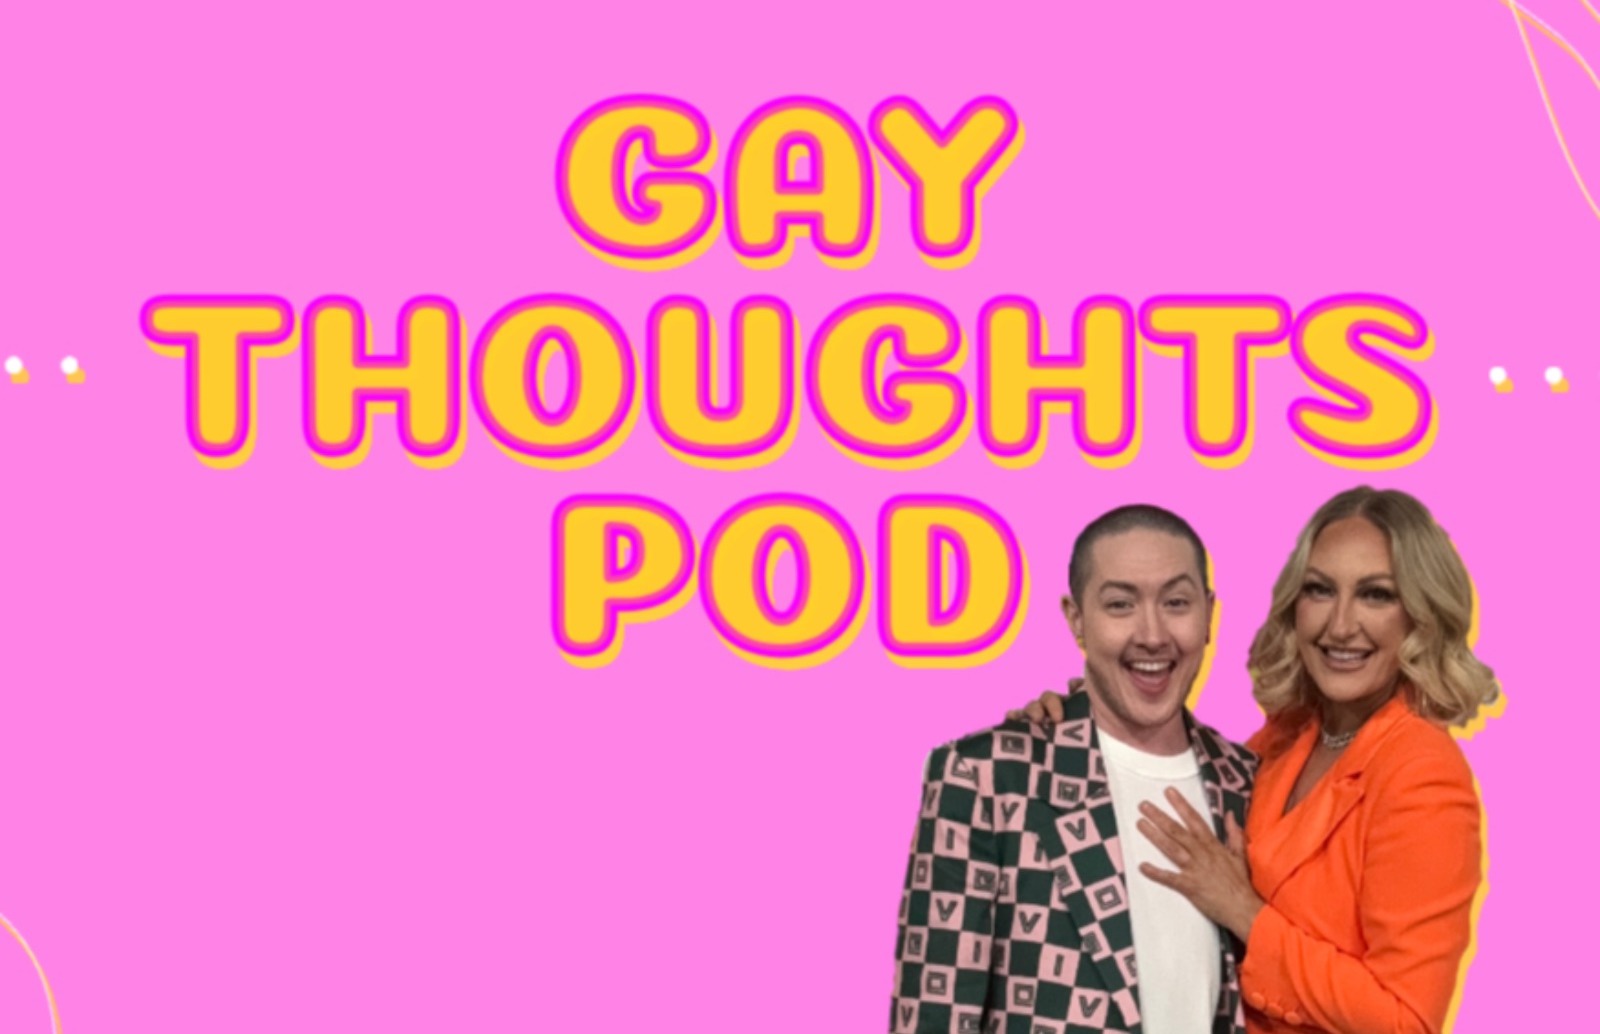 Queefing Championships to Queer Rights: Gay Thoughts Pod, which dives deep into lesbian life, launches during Lesbian Visibility Week